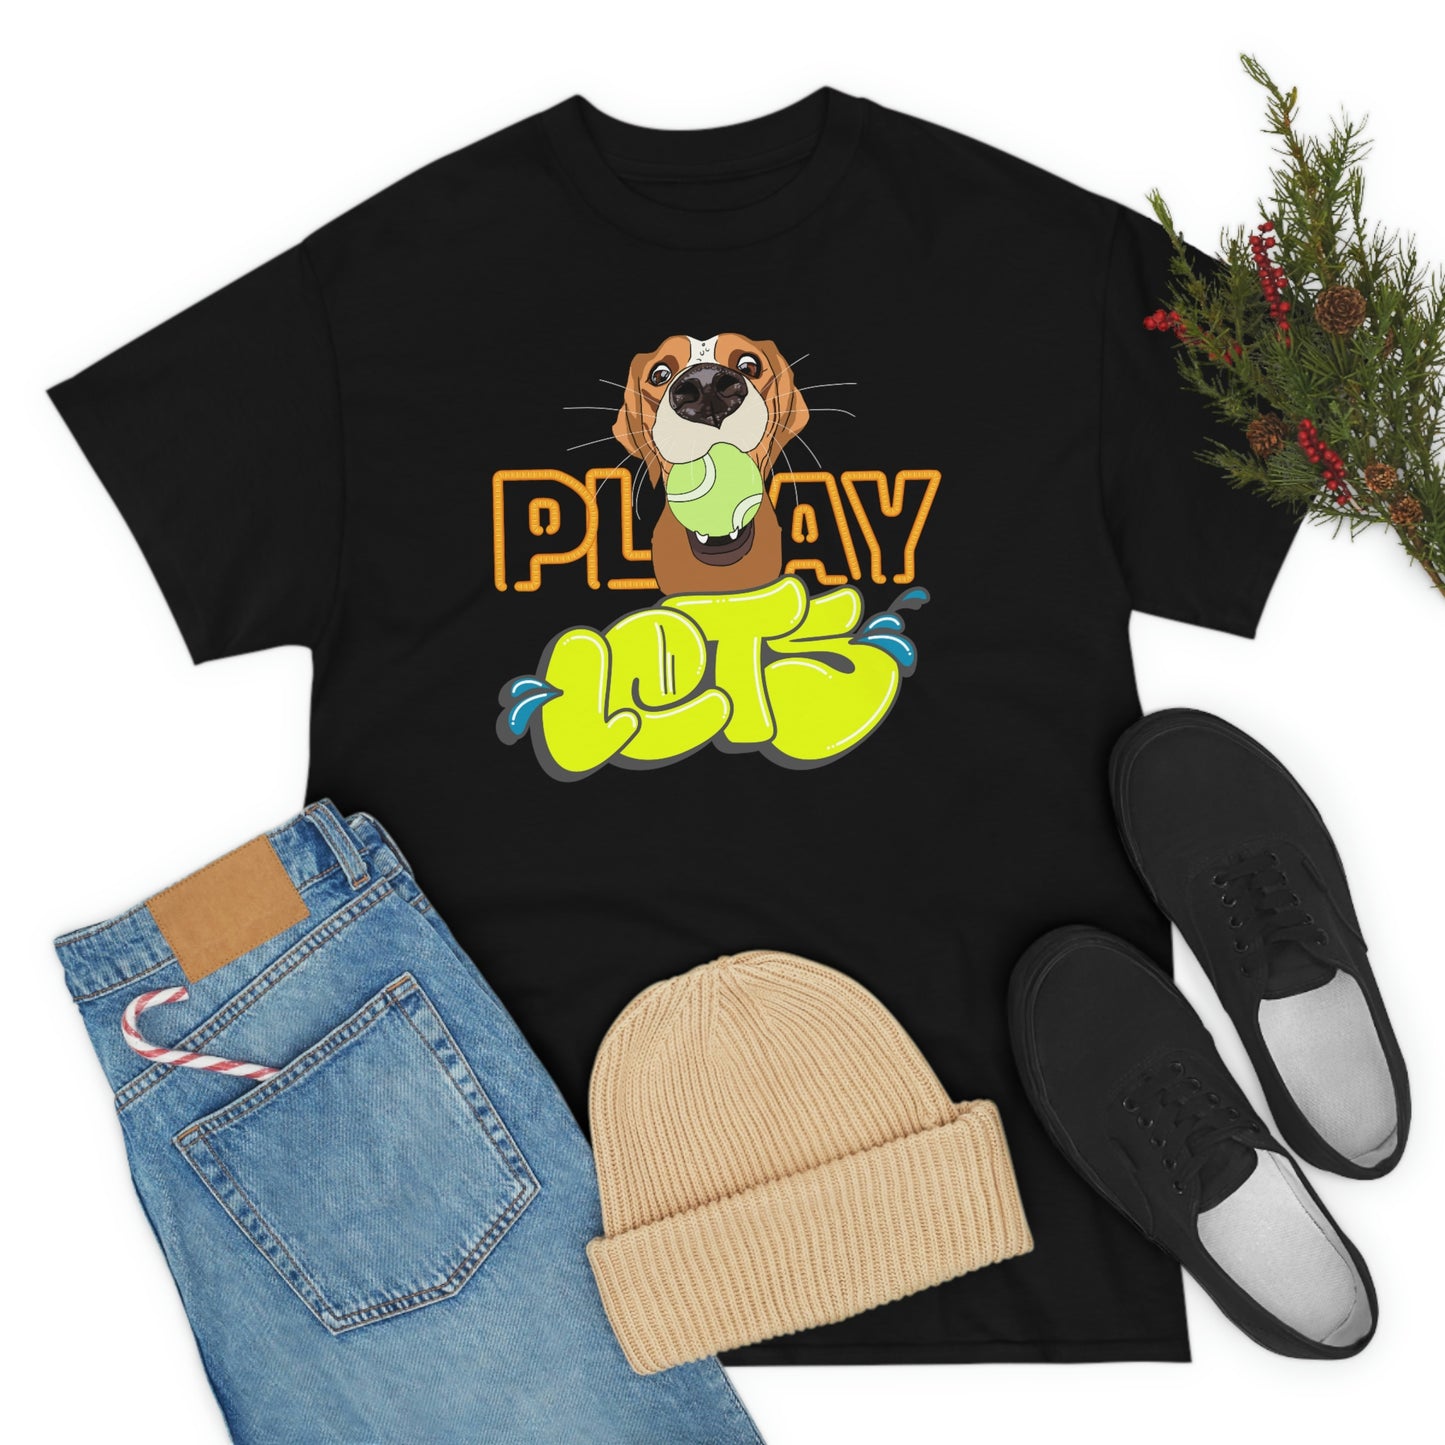 "Let's Play" Adorable Dog with Ball design white Cotton Tee